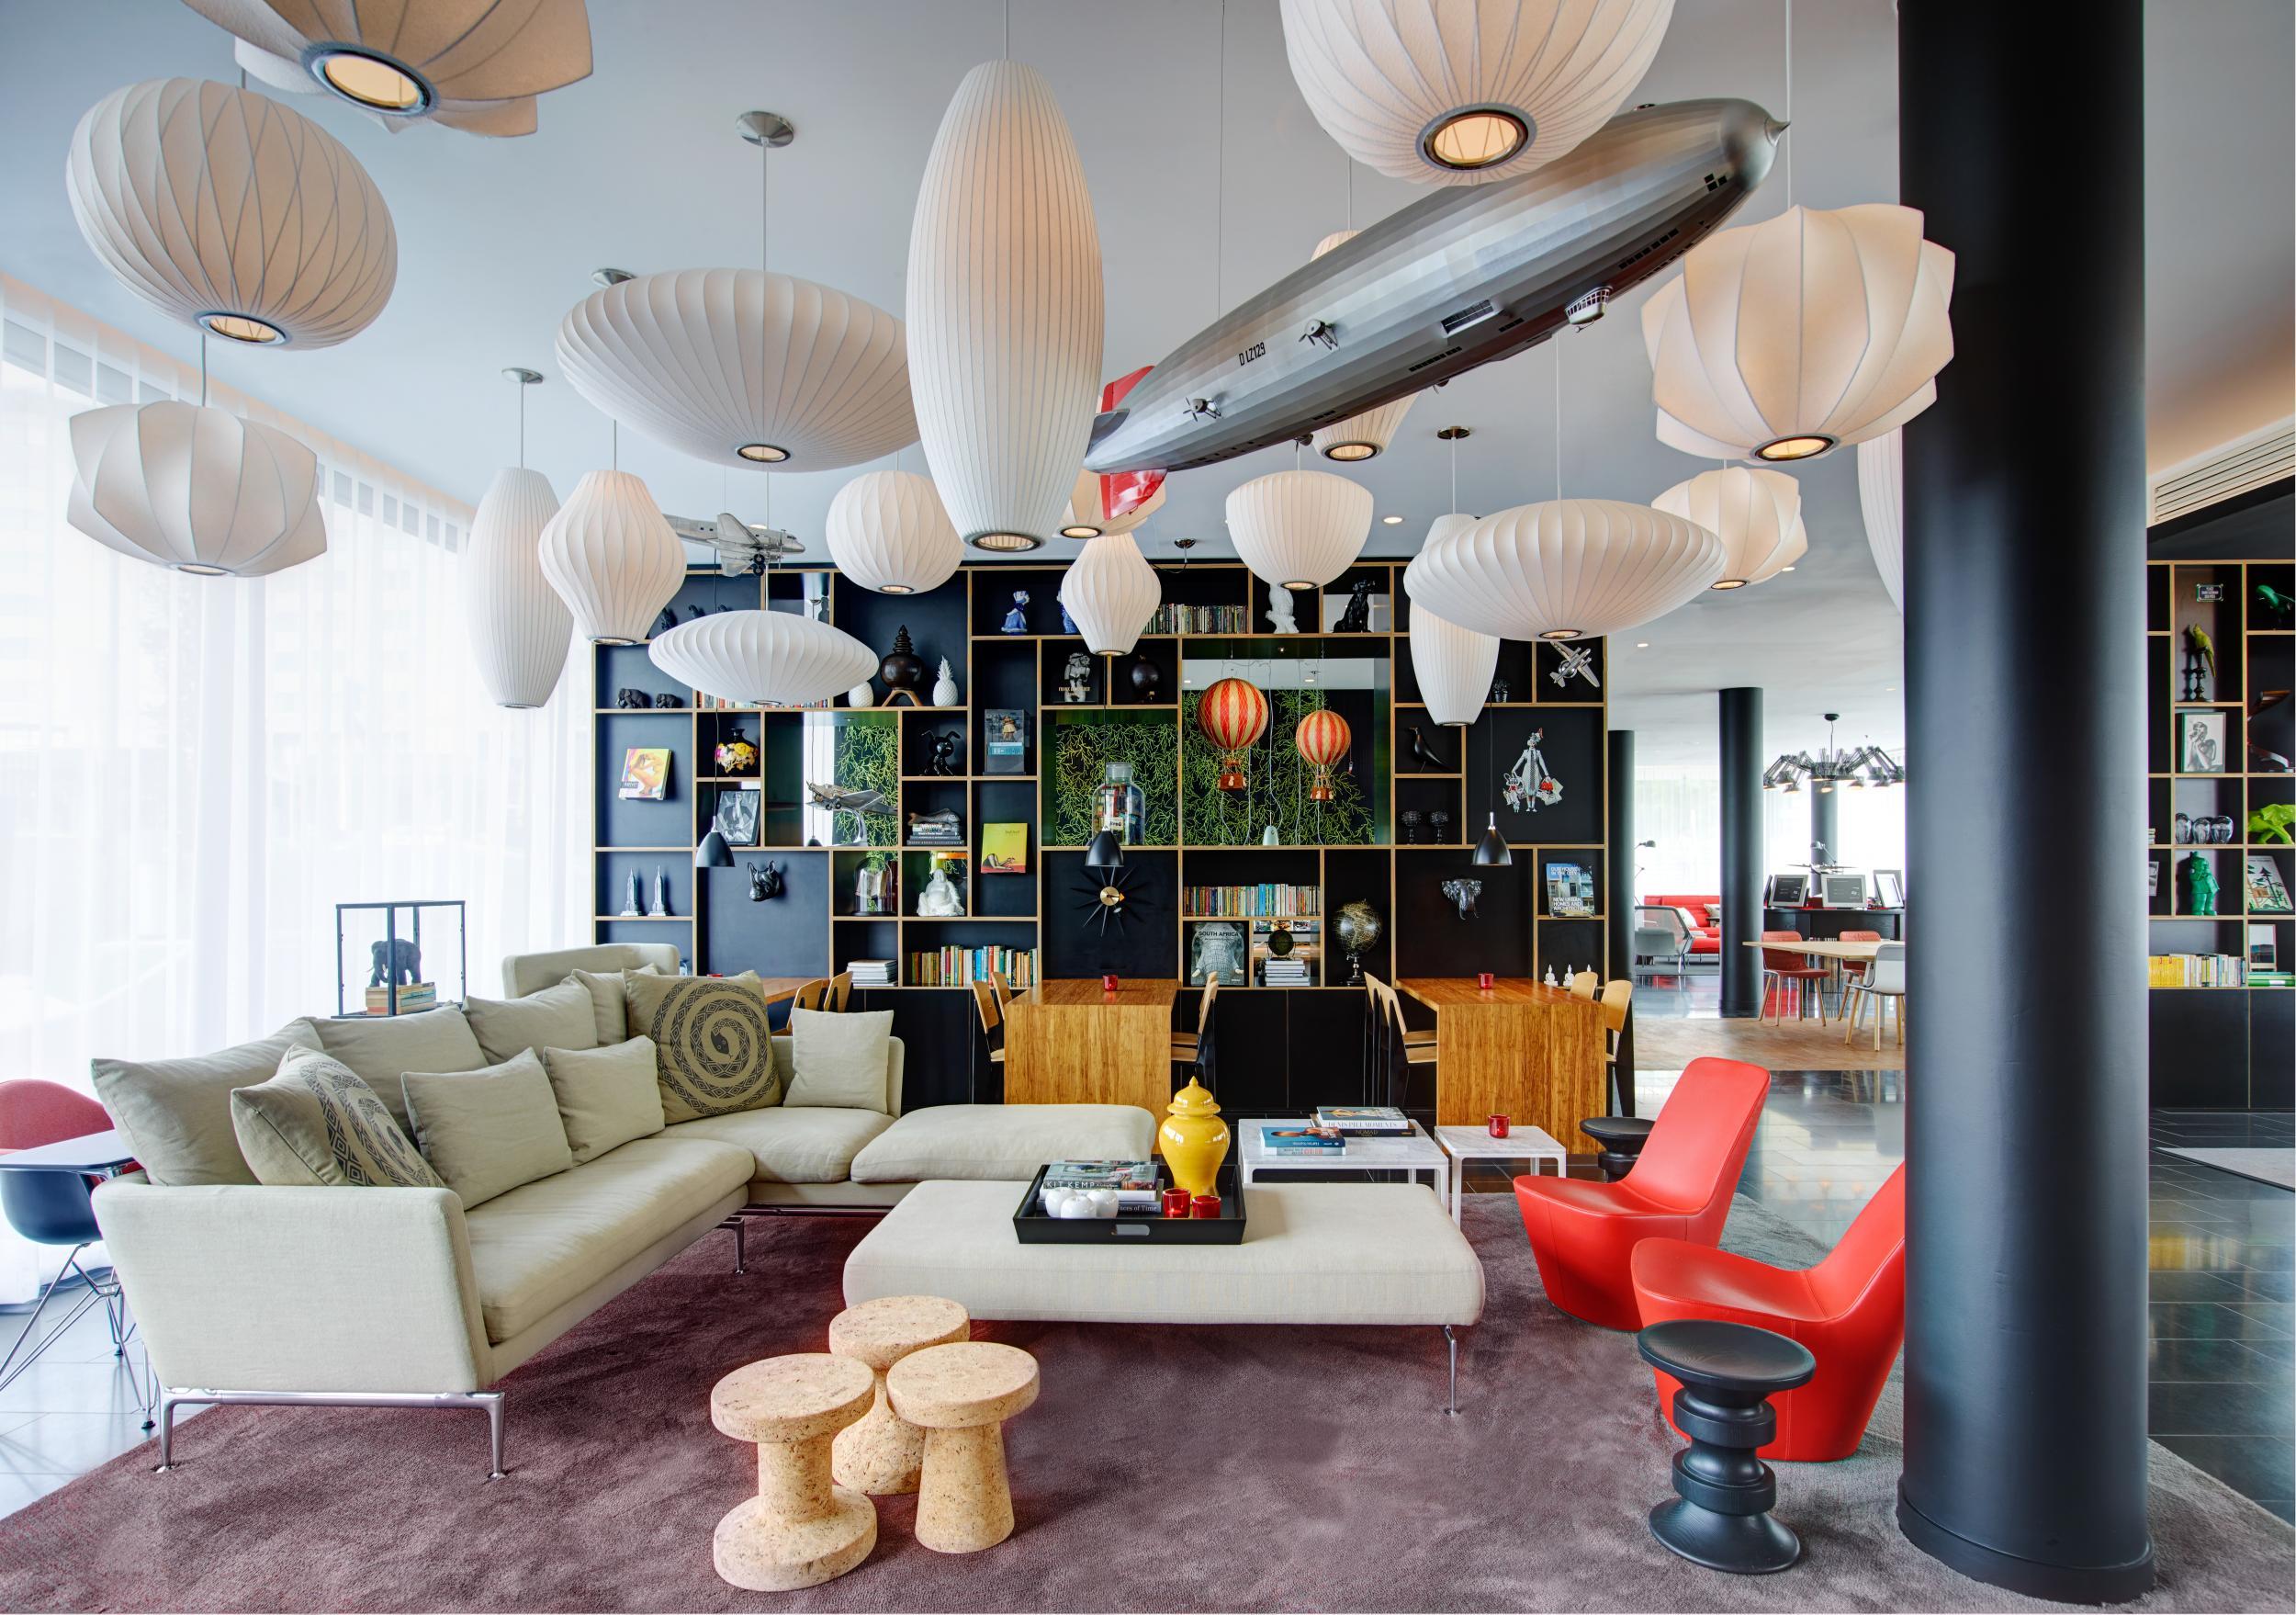 &#13;
CitizenM is littered with quirky pieces from around the world &#13;